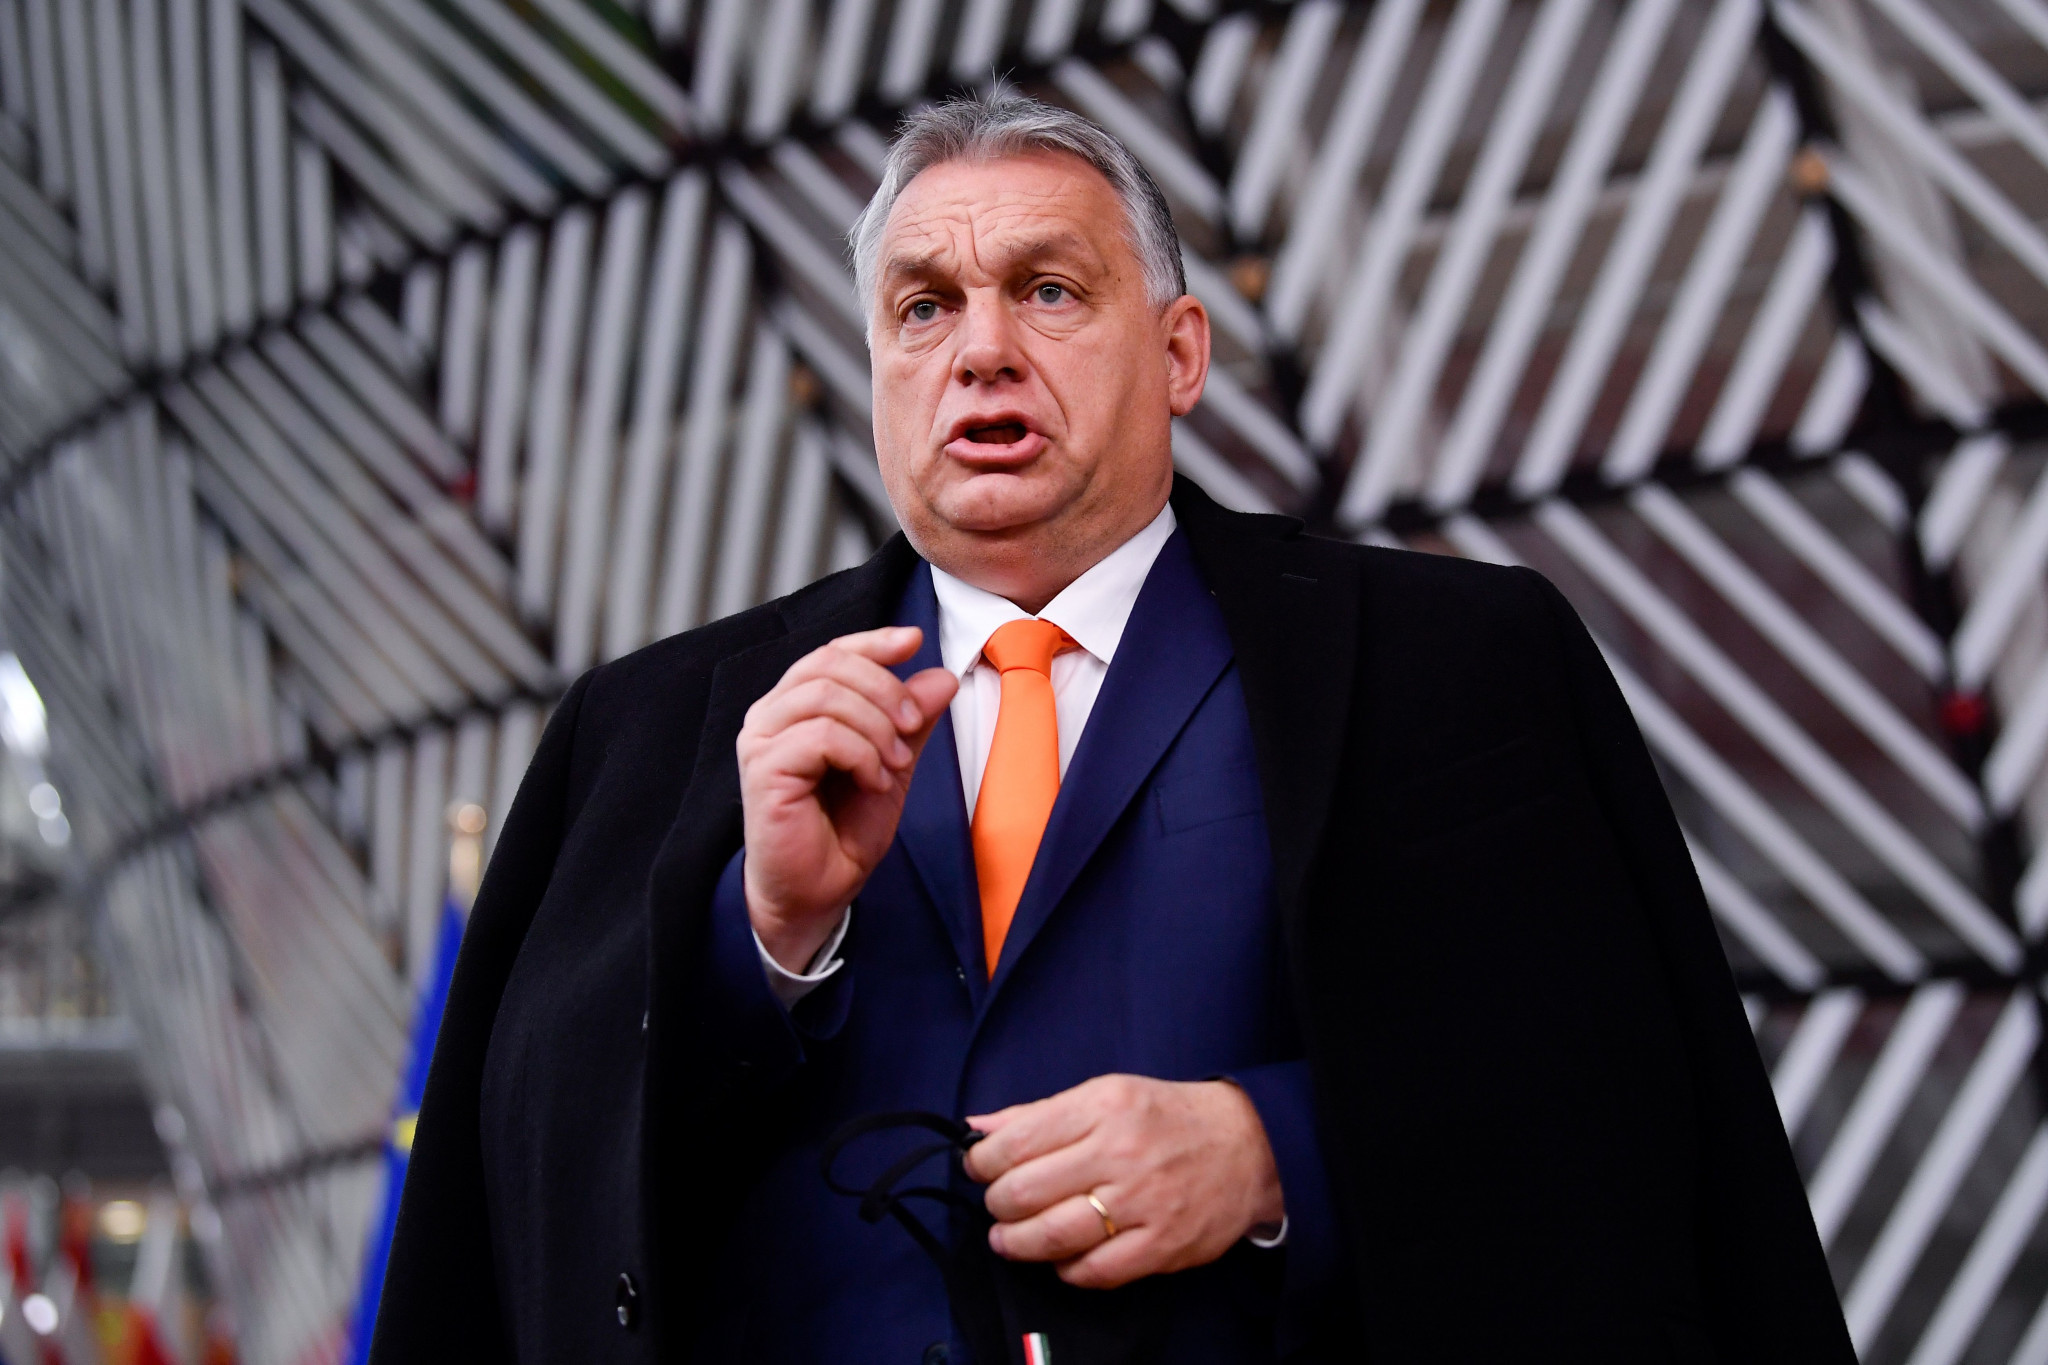 It has been suggested Viktor Orbán would not support hosting an event Russia and Belarus are set to be banned from ©Getty Images